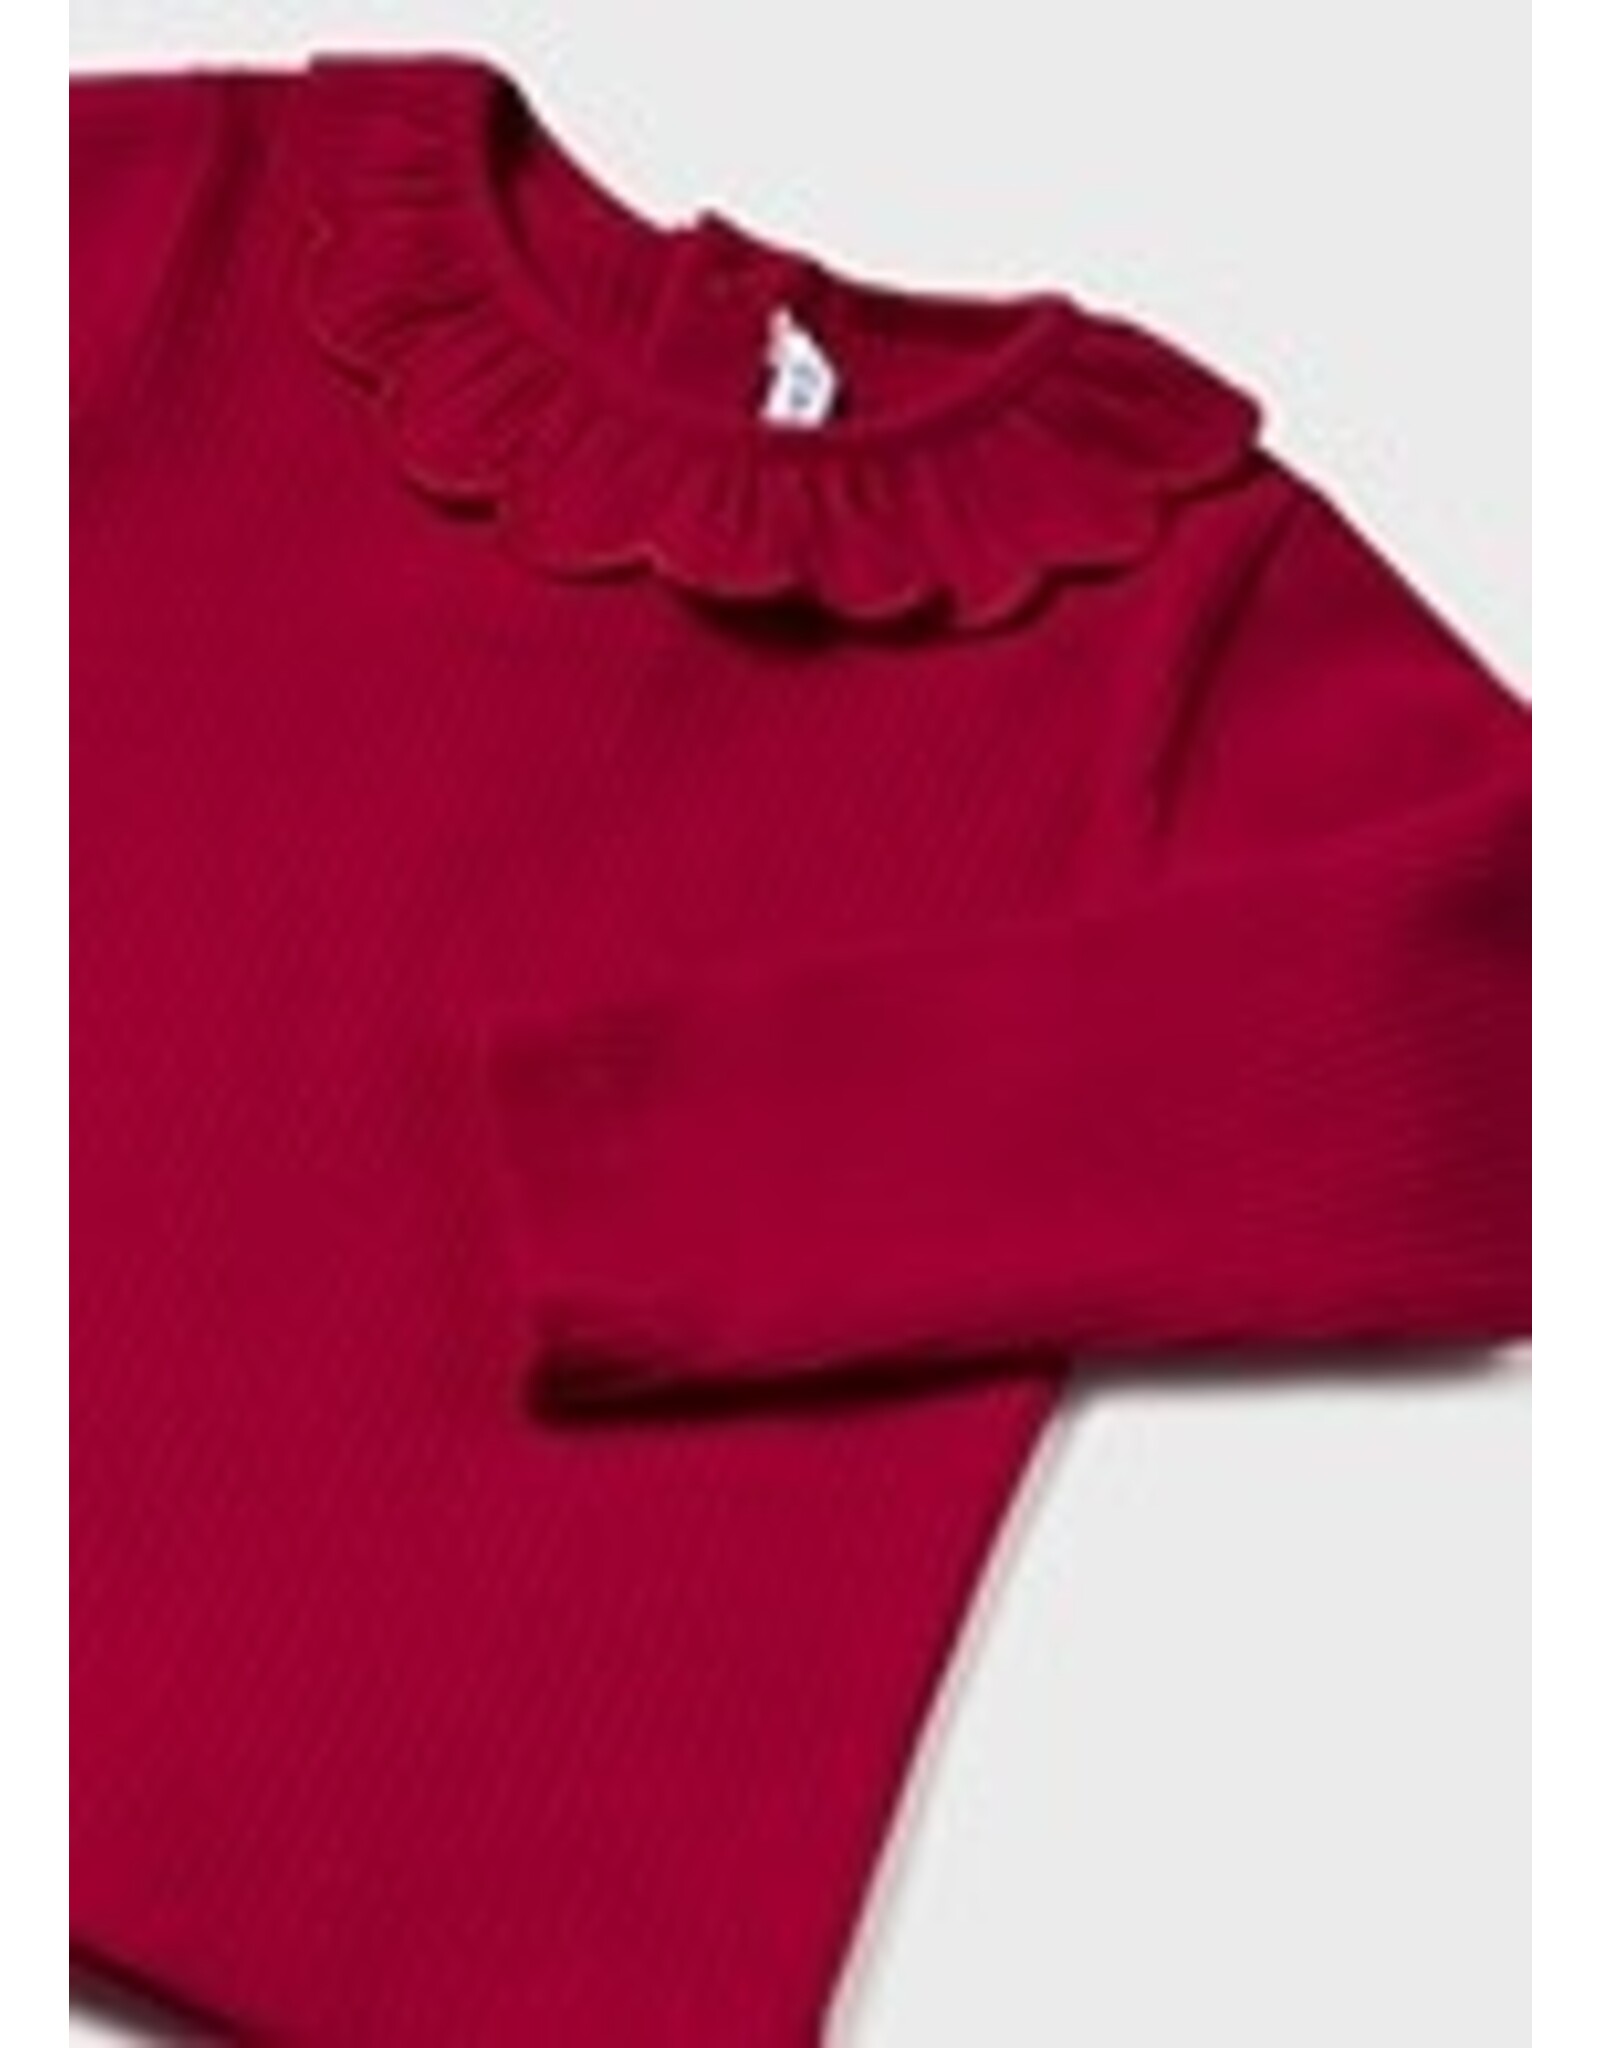 Mayoral Toddler Red Ribbed Long Sleeve